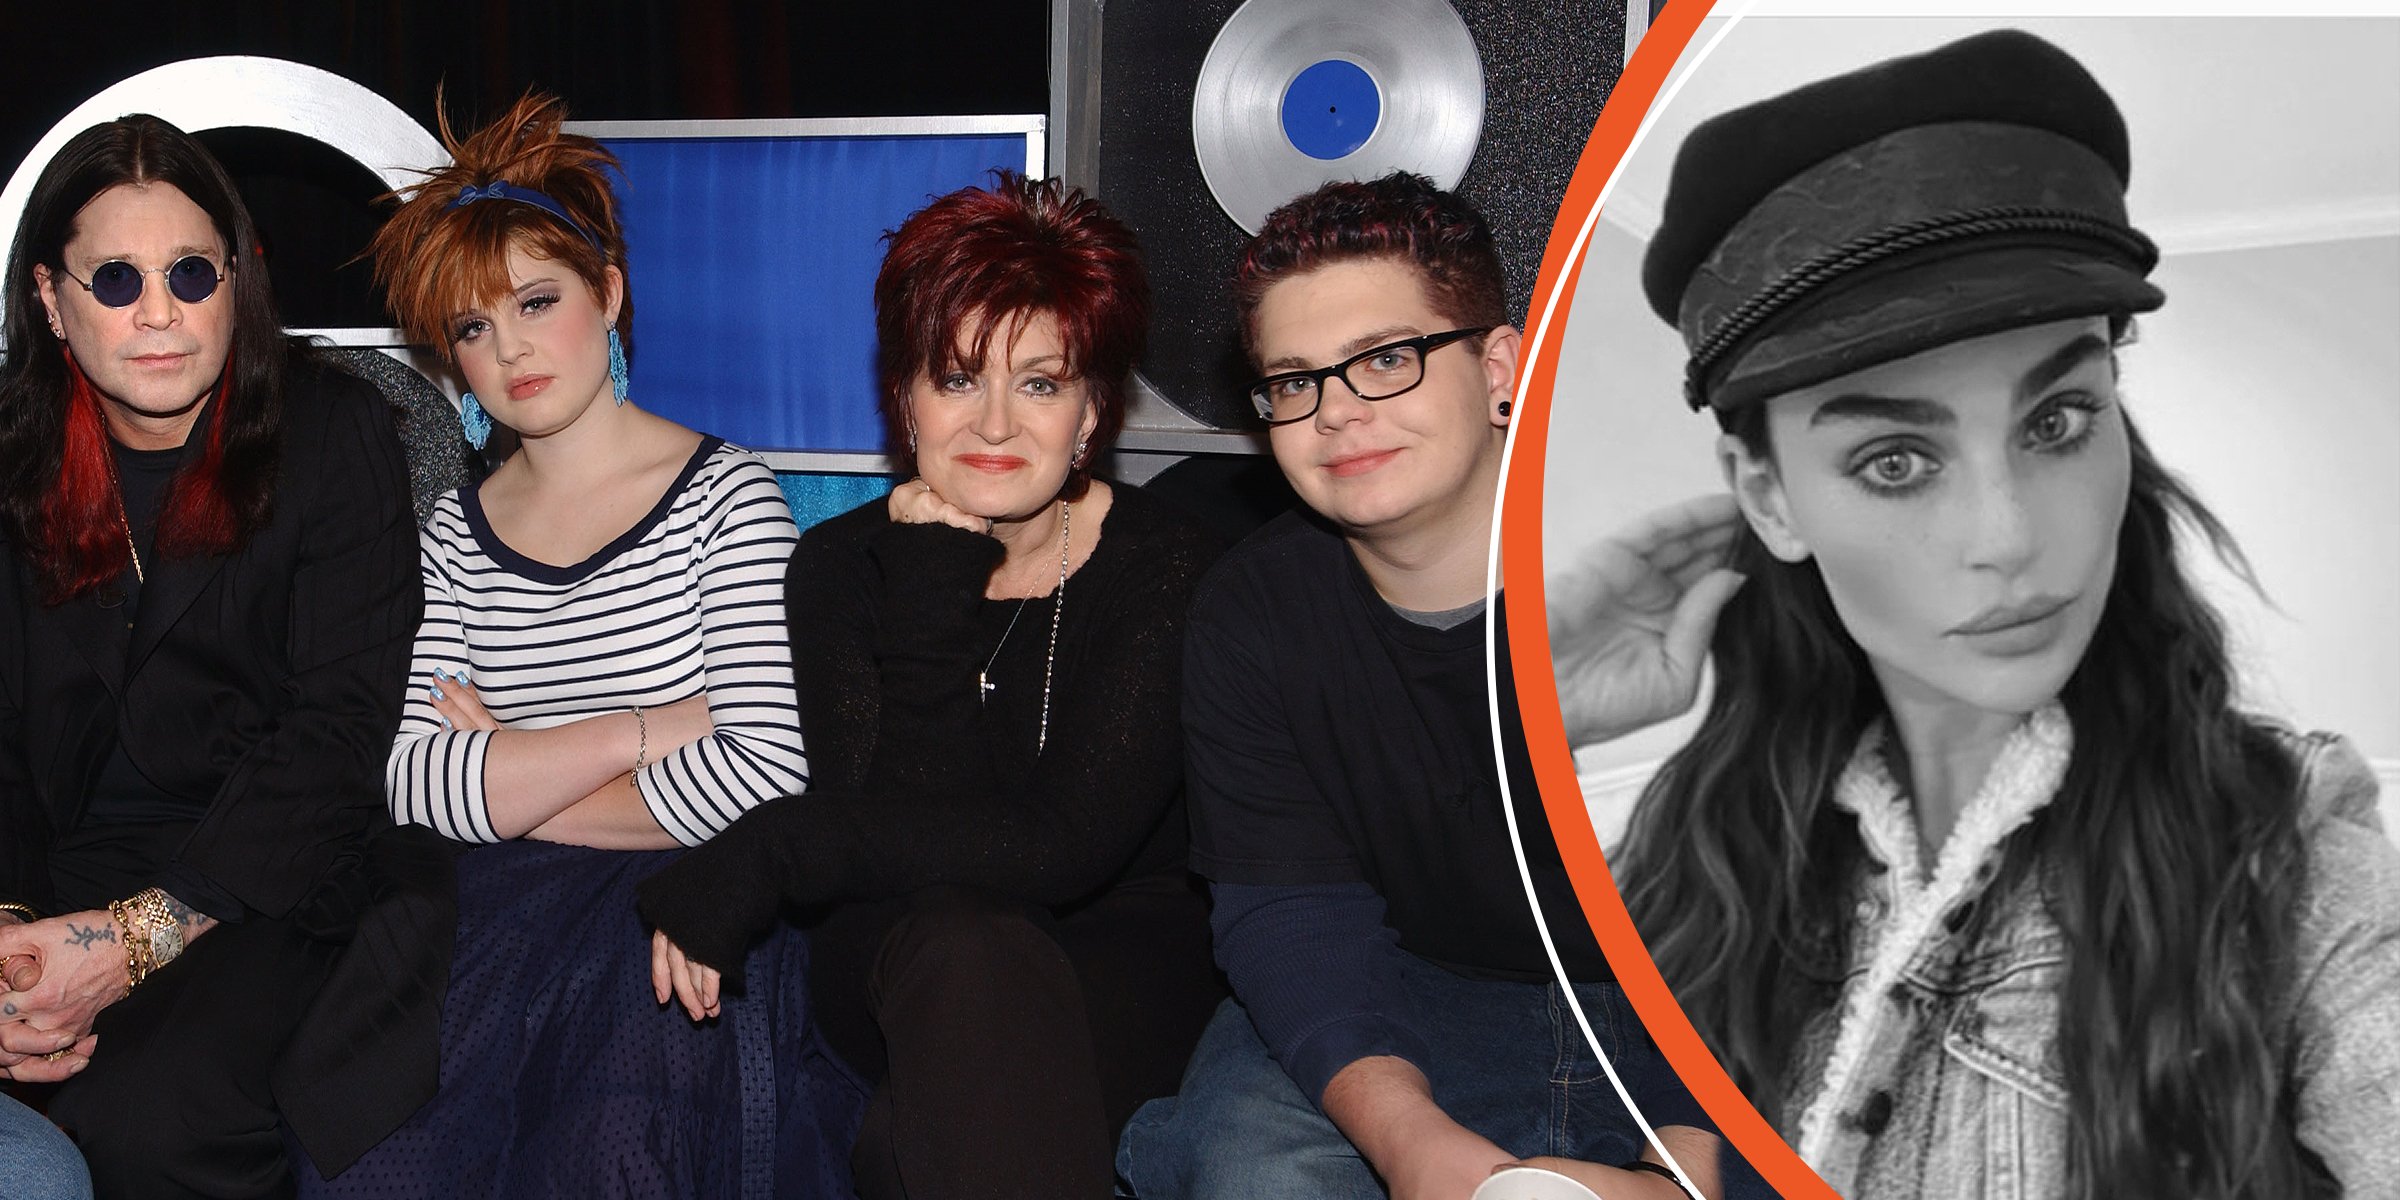 Left: Ozzy, Kelly, Sharon and Jack Osbourne pose for a photo: Source: Getty Images. Right: The Osbourne's less known daughter, Aimee. | Source: Instagram.com/aro_officialmusic